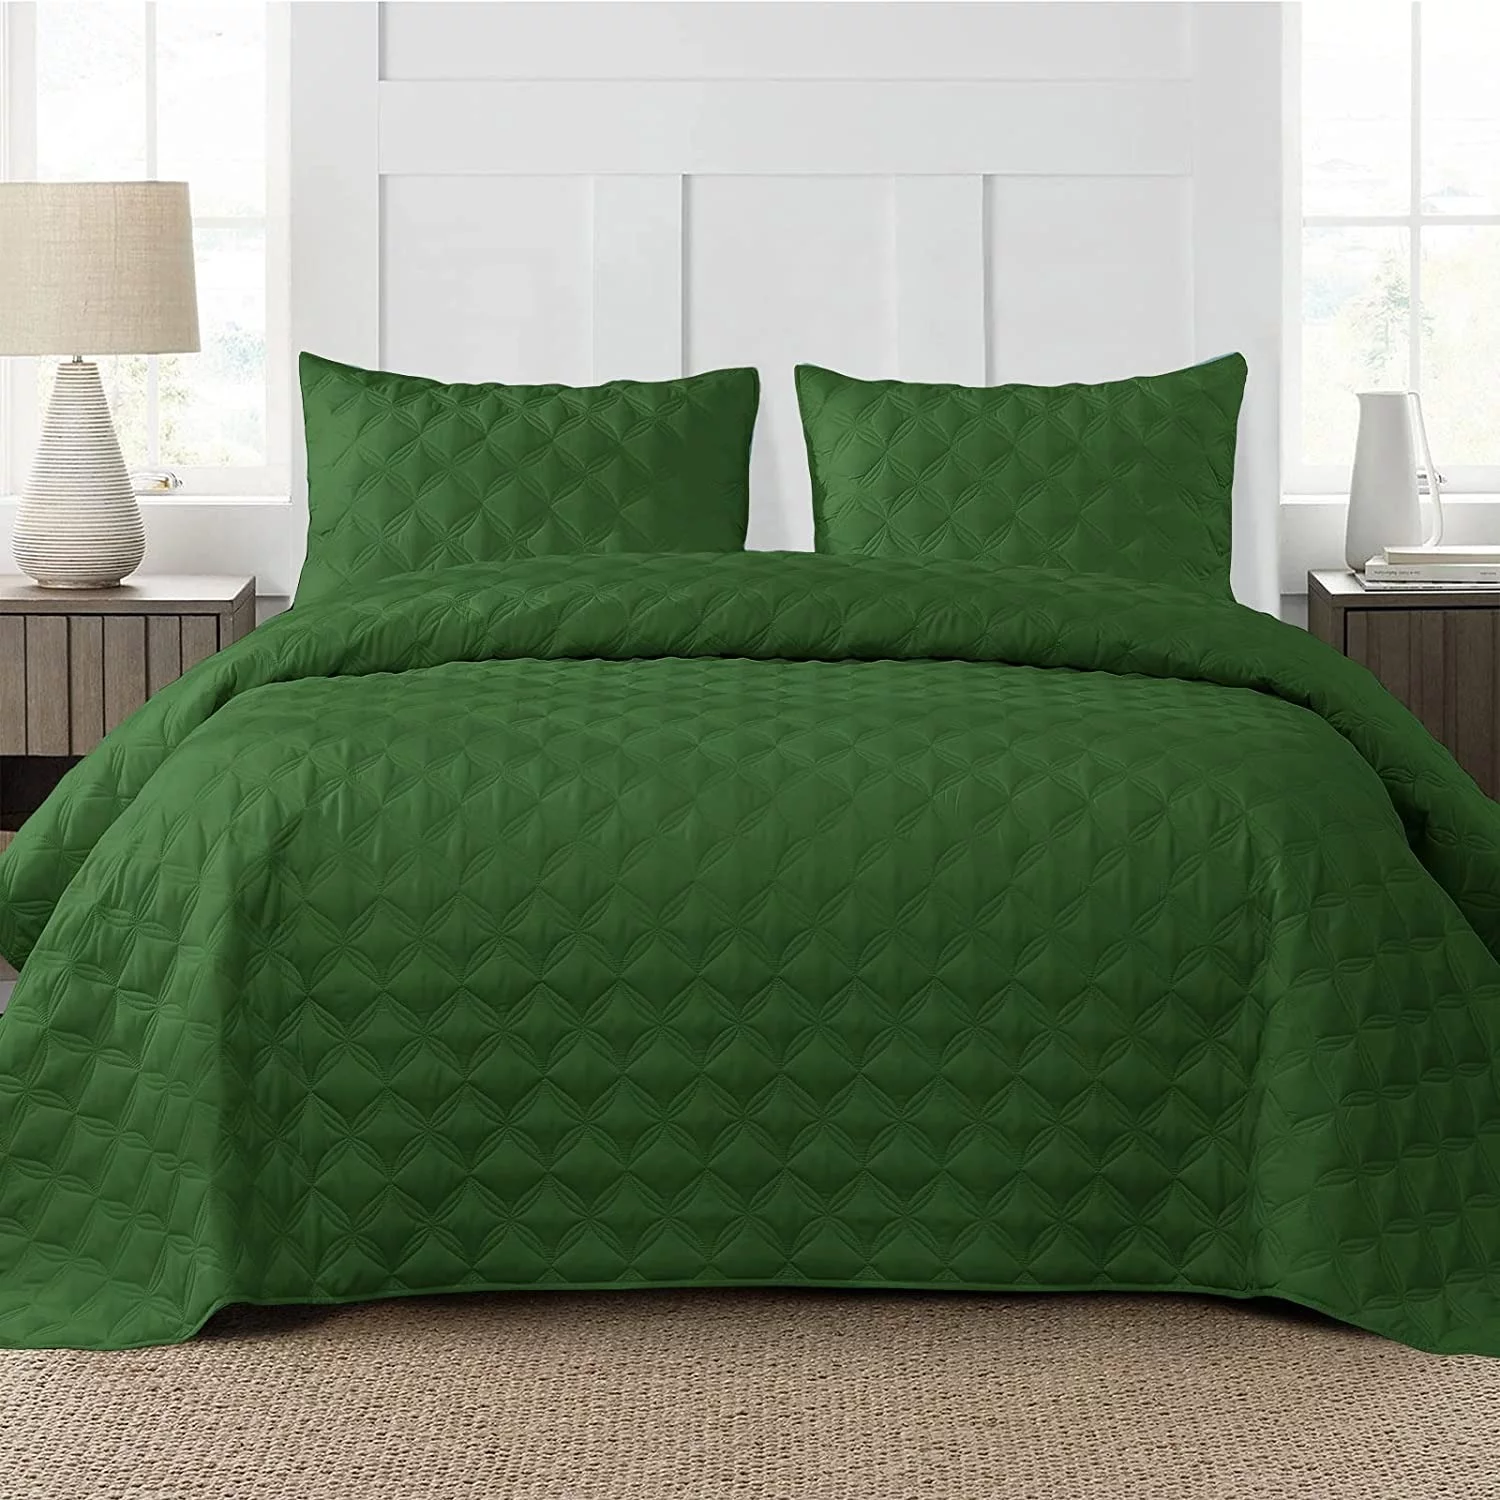 Exclusivo Mezcla Bed Quilt Set King Size for All Season, Stitched Pattern Quilted Bedspread/ Bedding Set/ Coverlet with 2 Pillow shams, Lightweight and Soft, Grass Green